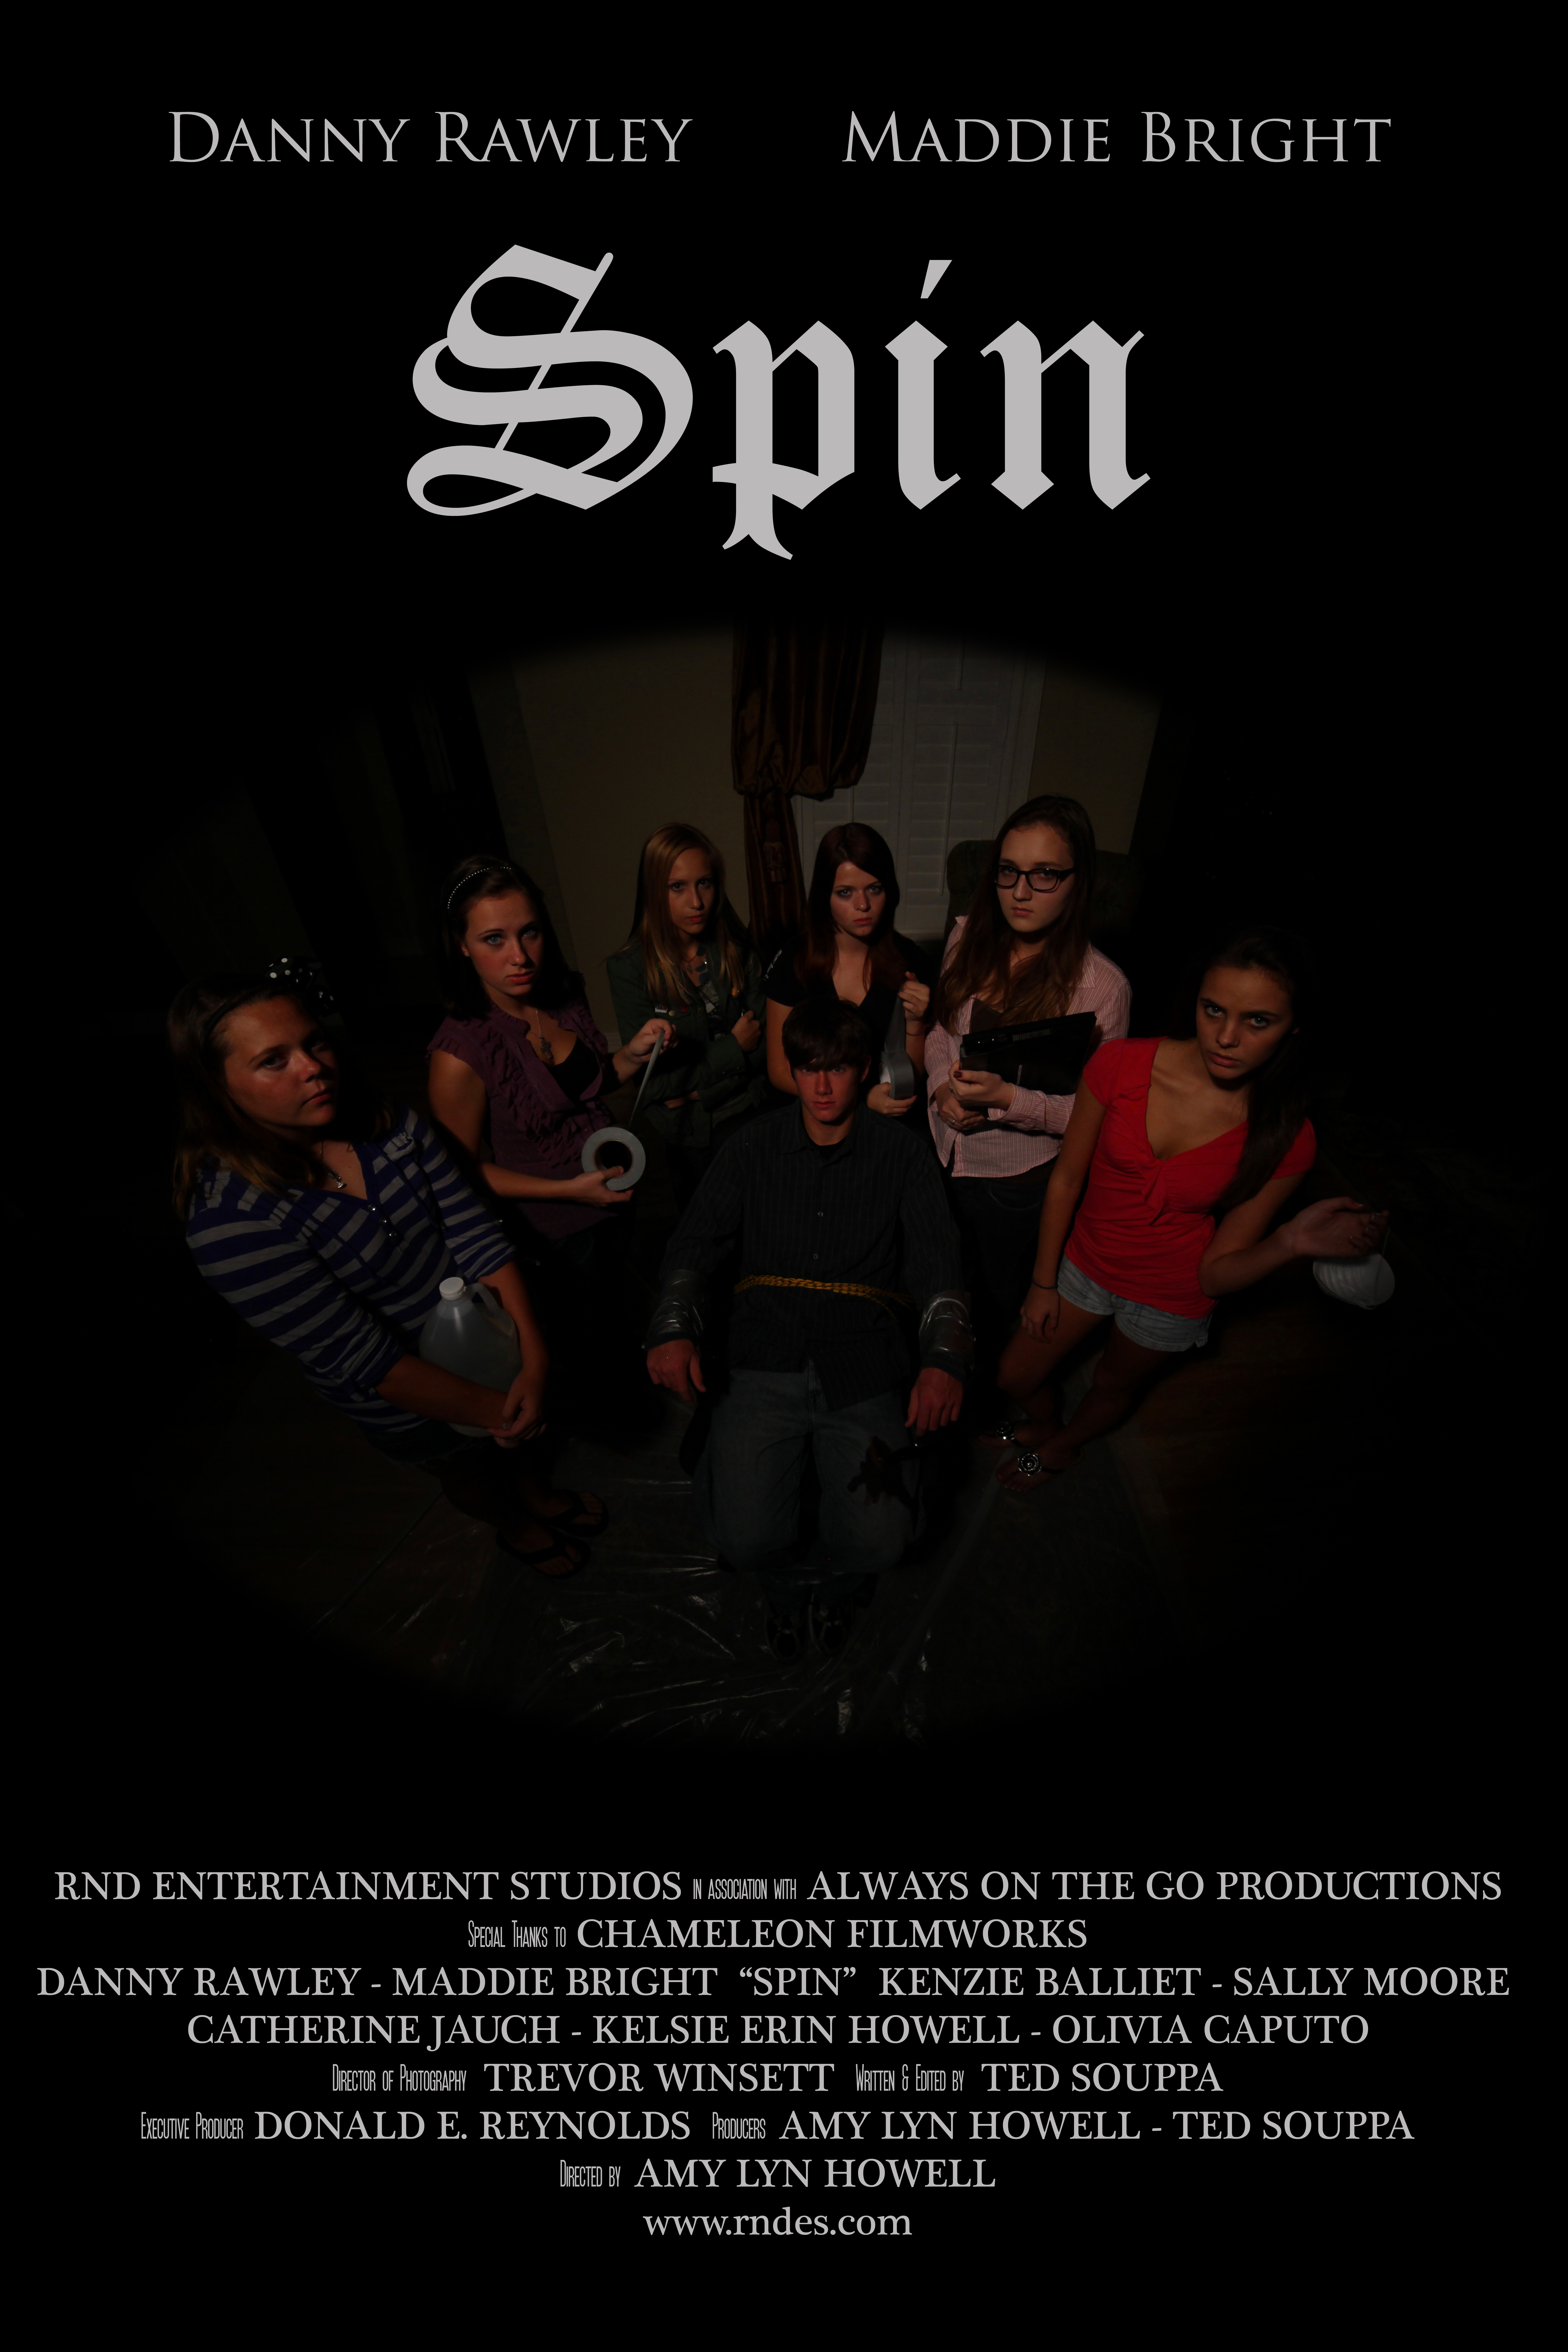 Andrea Alfonso, Amy Lyn Howell, Kelsie Erin Howell, Trevor Winsett, Donald E. Reynolds, Martin Lemaire, Ted Souppa, Catherine Jauch, Maddie Bright, Donovan Souppa, Mark William Myers, Sally Moore, Kenzie Balliet, Olivia Caputo and Julia Corrie in Spin (2011)